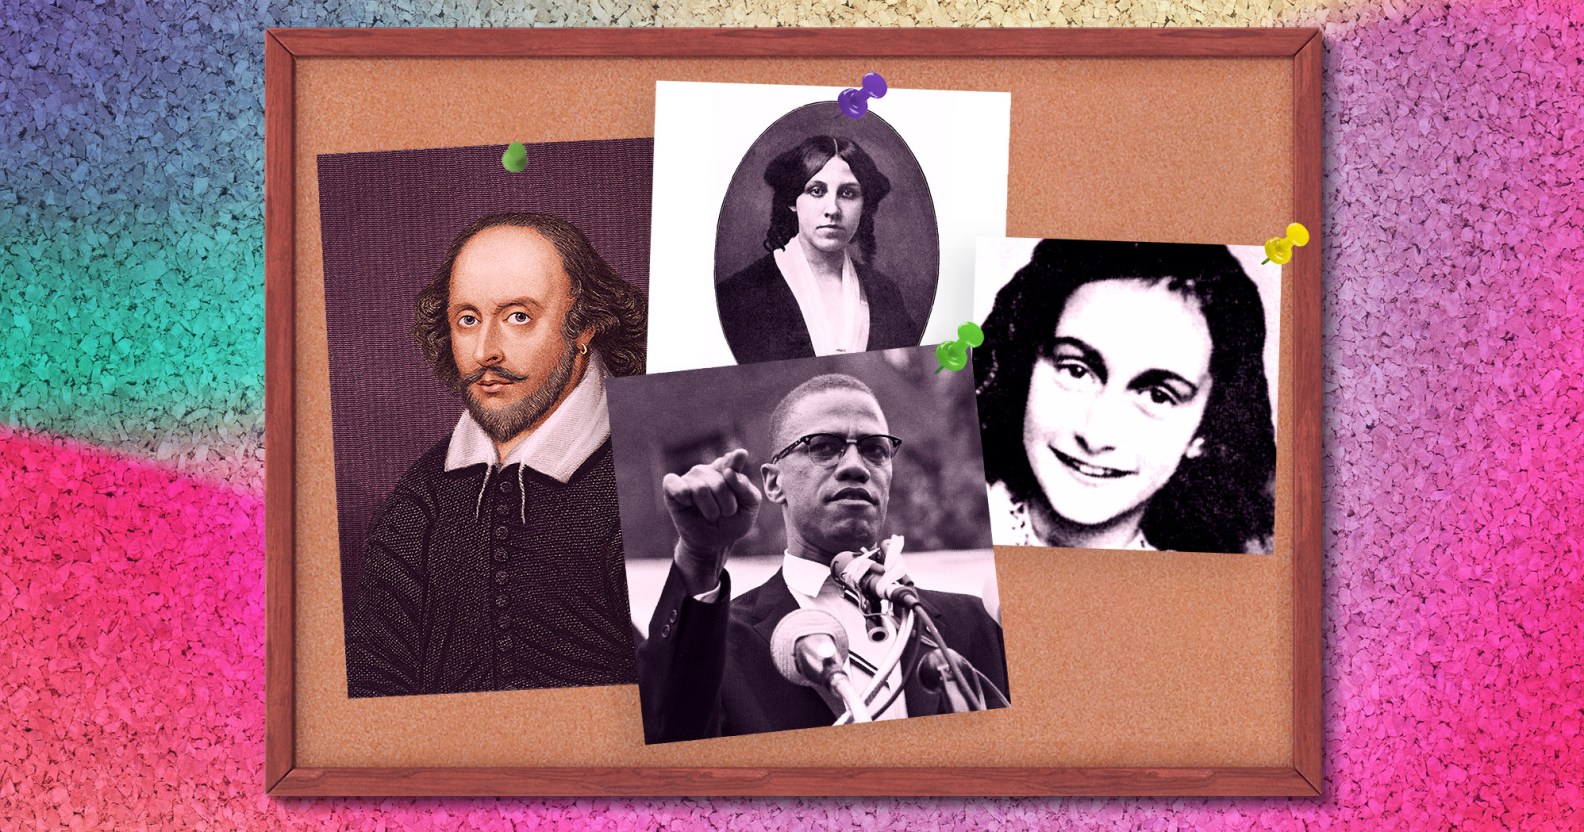 The image shows a notice board set against a colourful background. On the notice board are four images – the one on the left is of William Shakespeare, next is Louisa May Alcott, under that is Malcolm X and Anne Frank is on the right hand side.